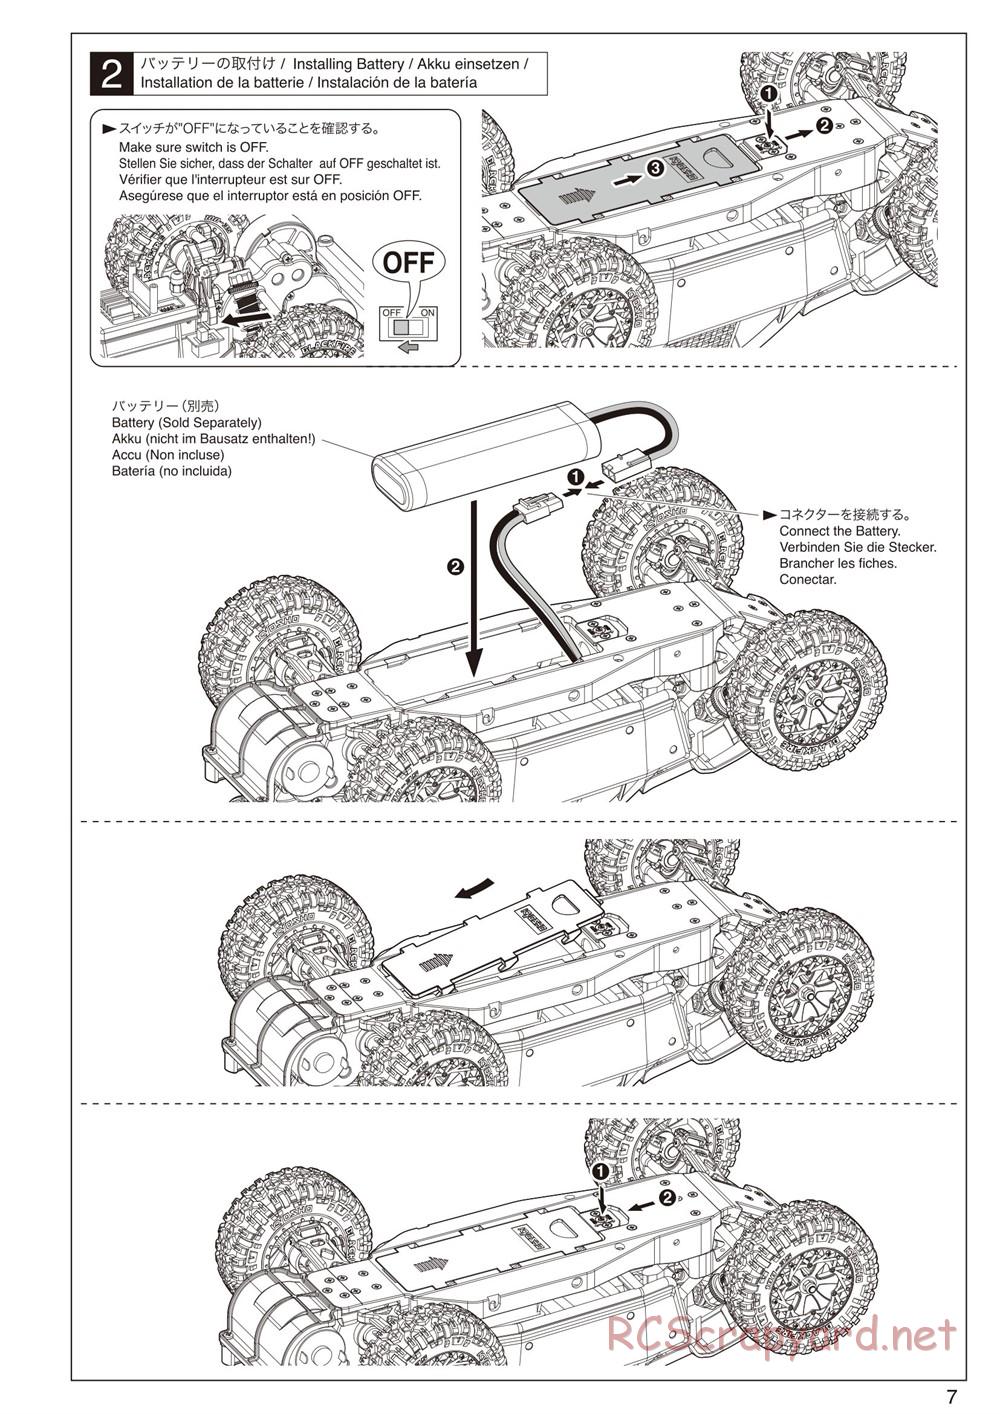 Kyosho - Axxe 2WD Desert Buggy - Manual - Page 7